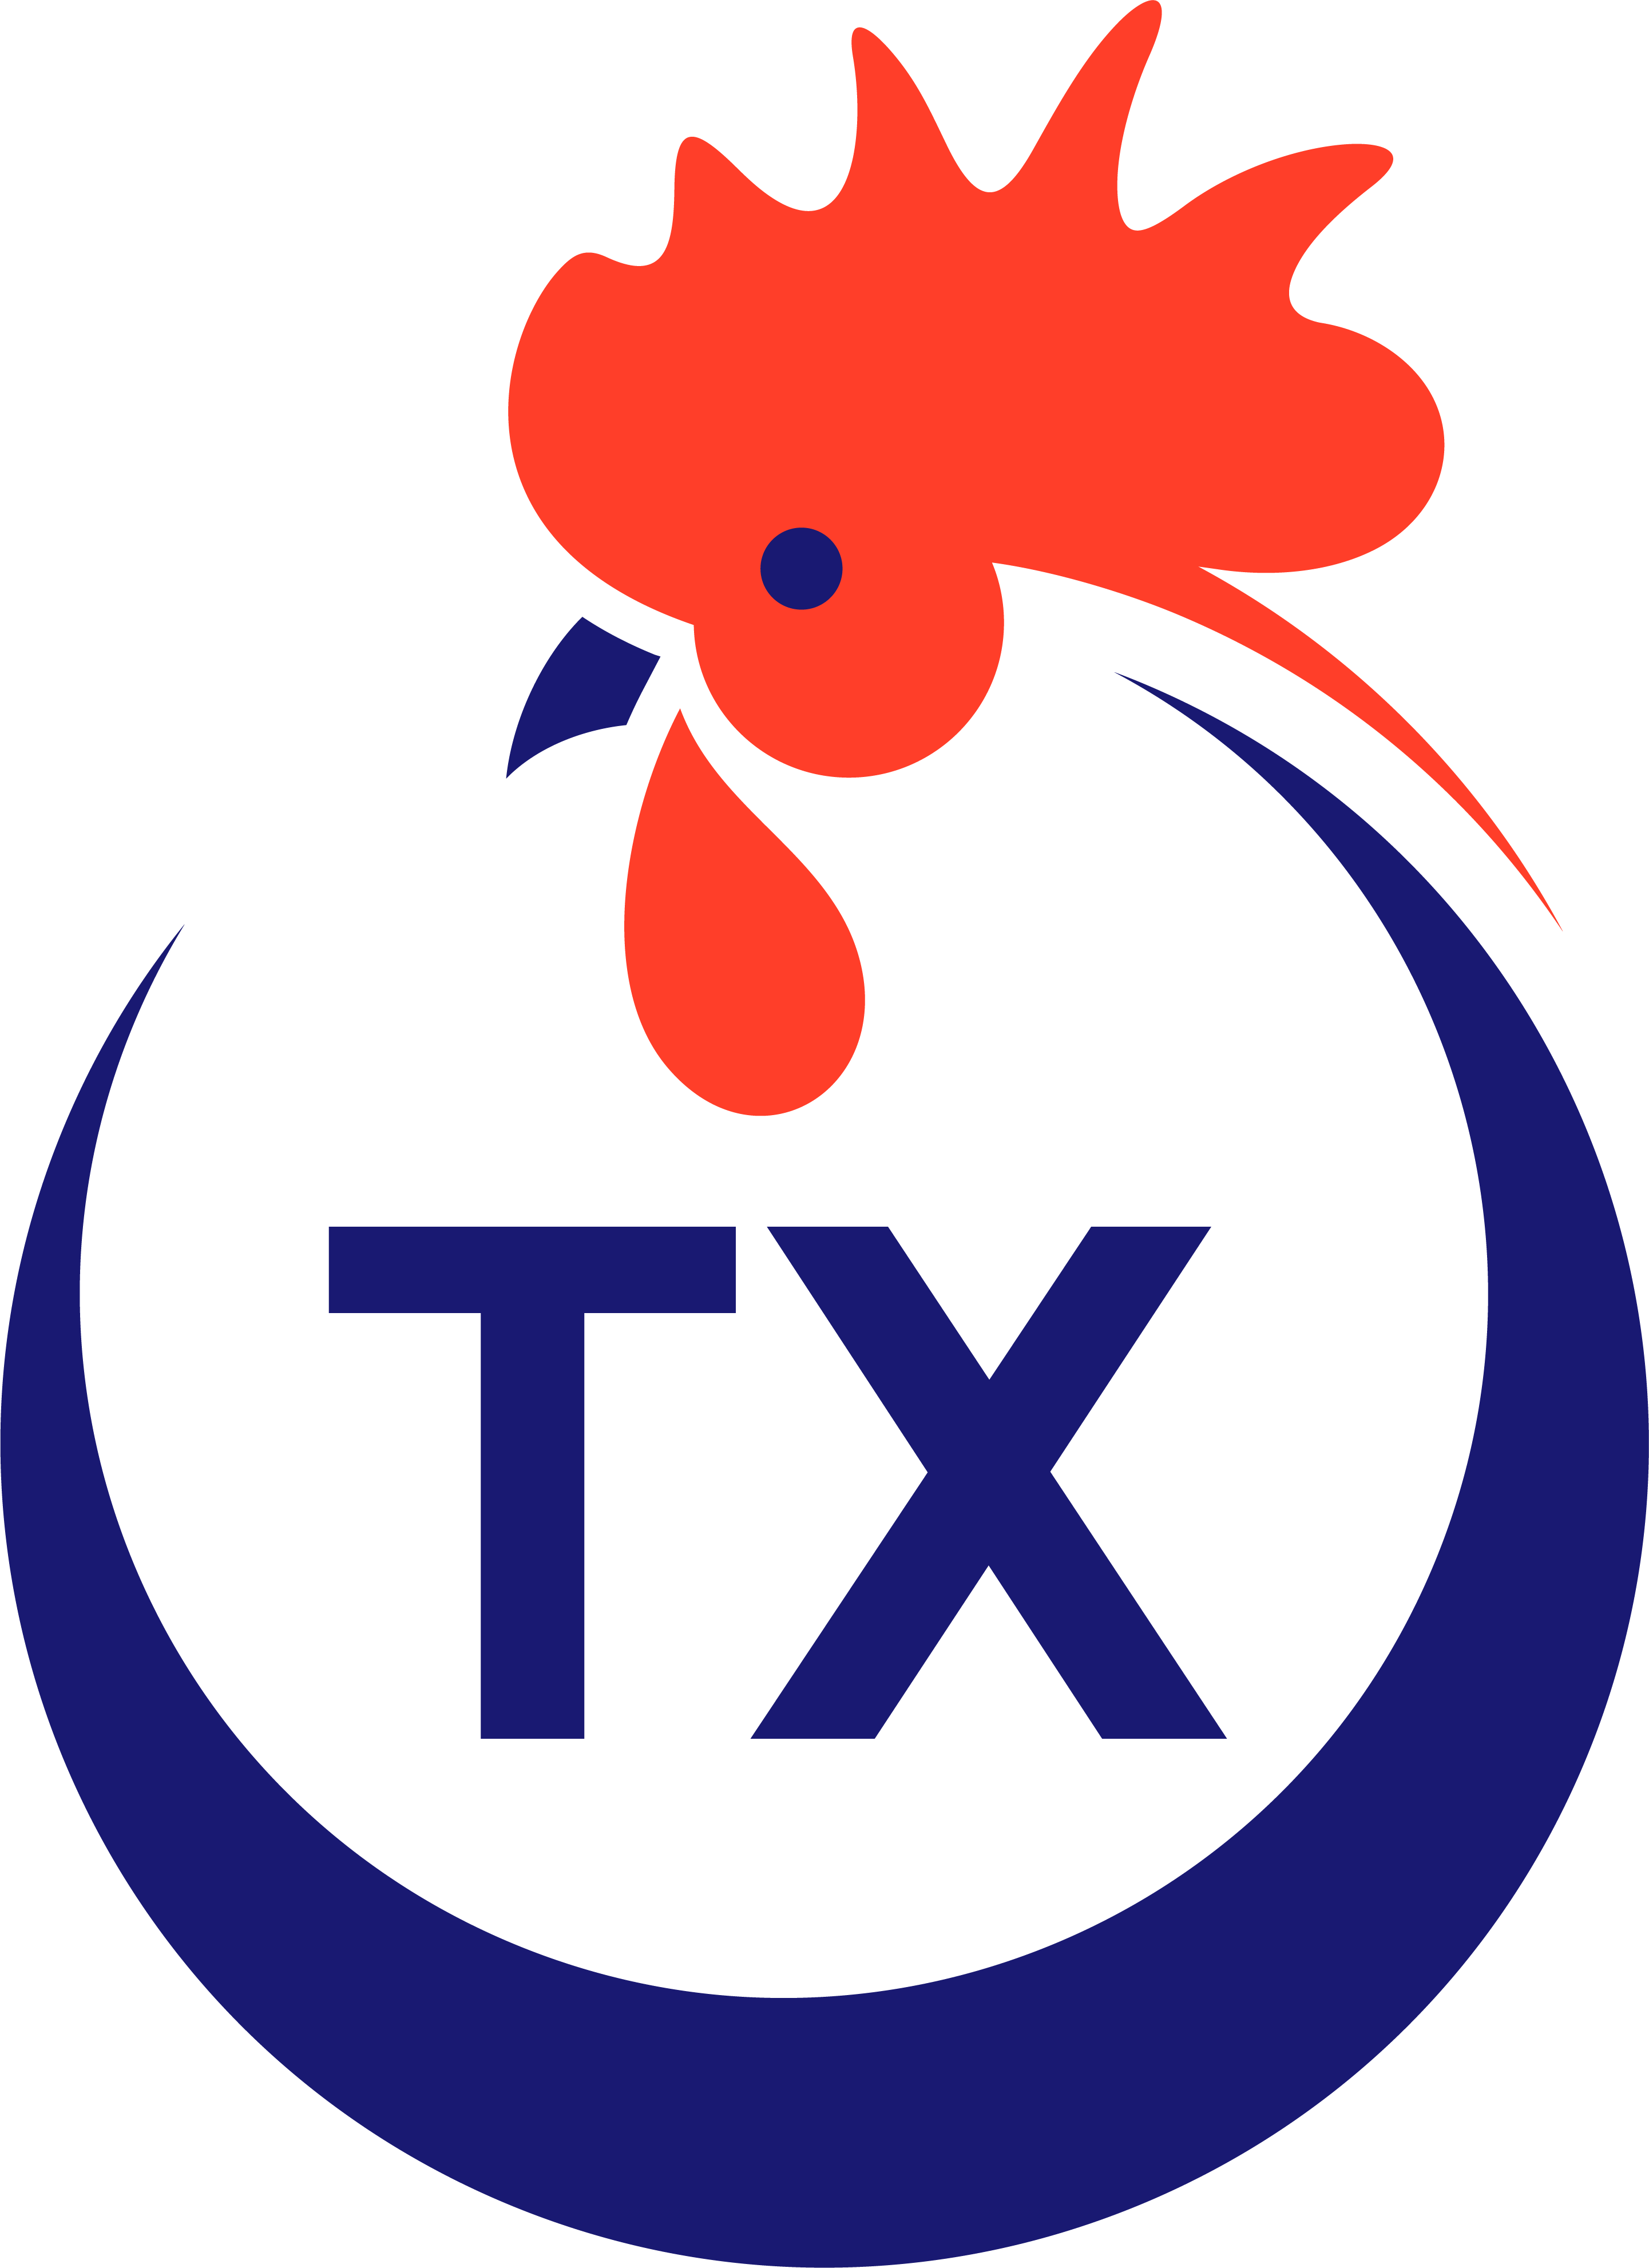 Texas rooster icon